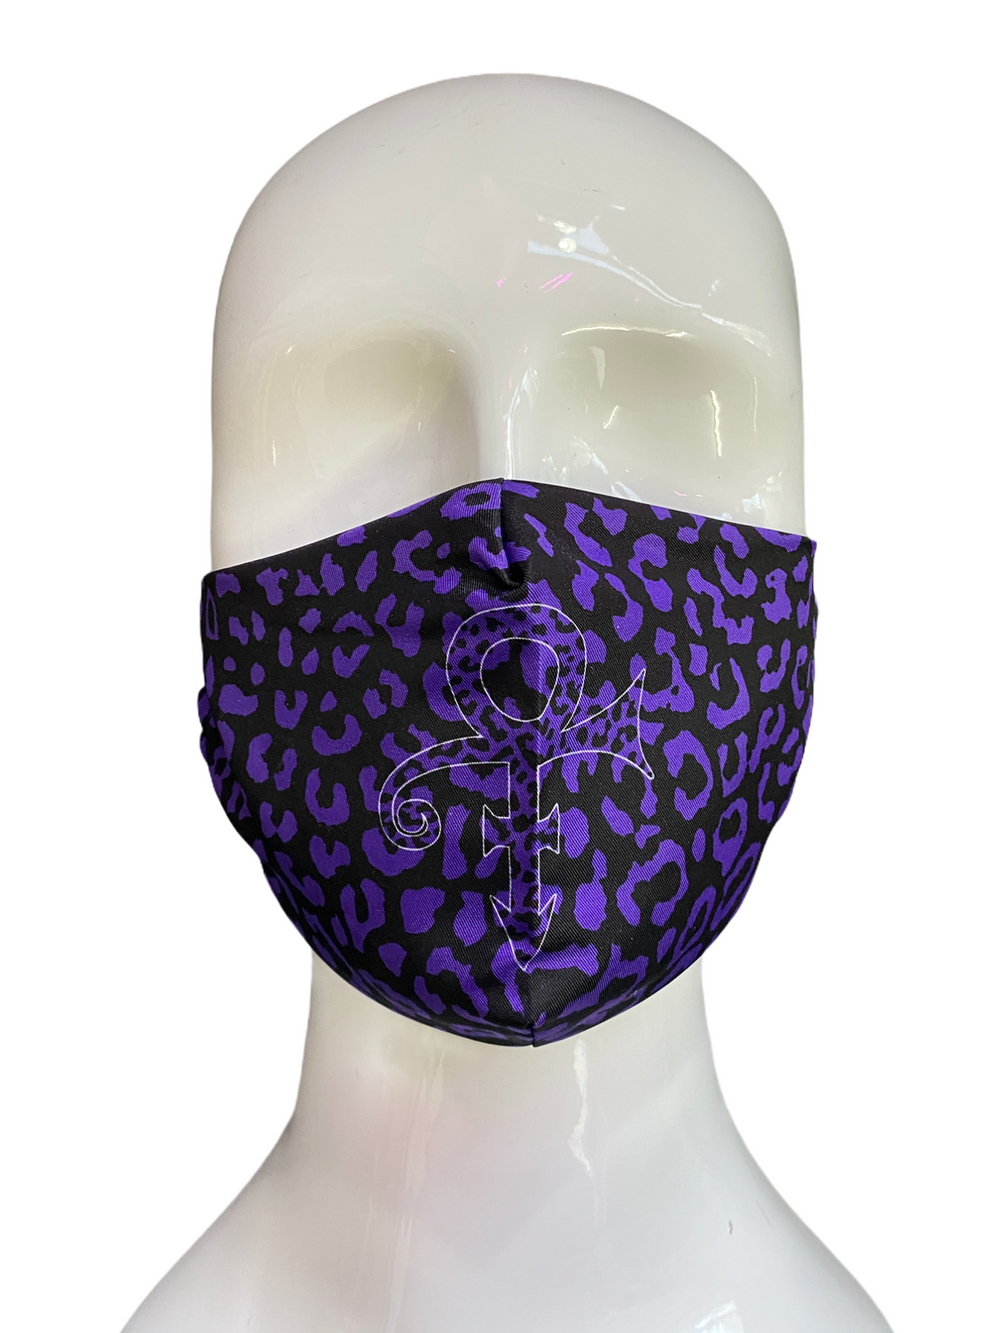 Prince – Official Face Mask Re-Usable Brand New Sealed Cheetah Love Symbol